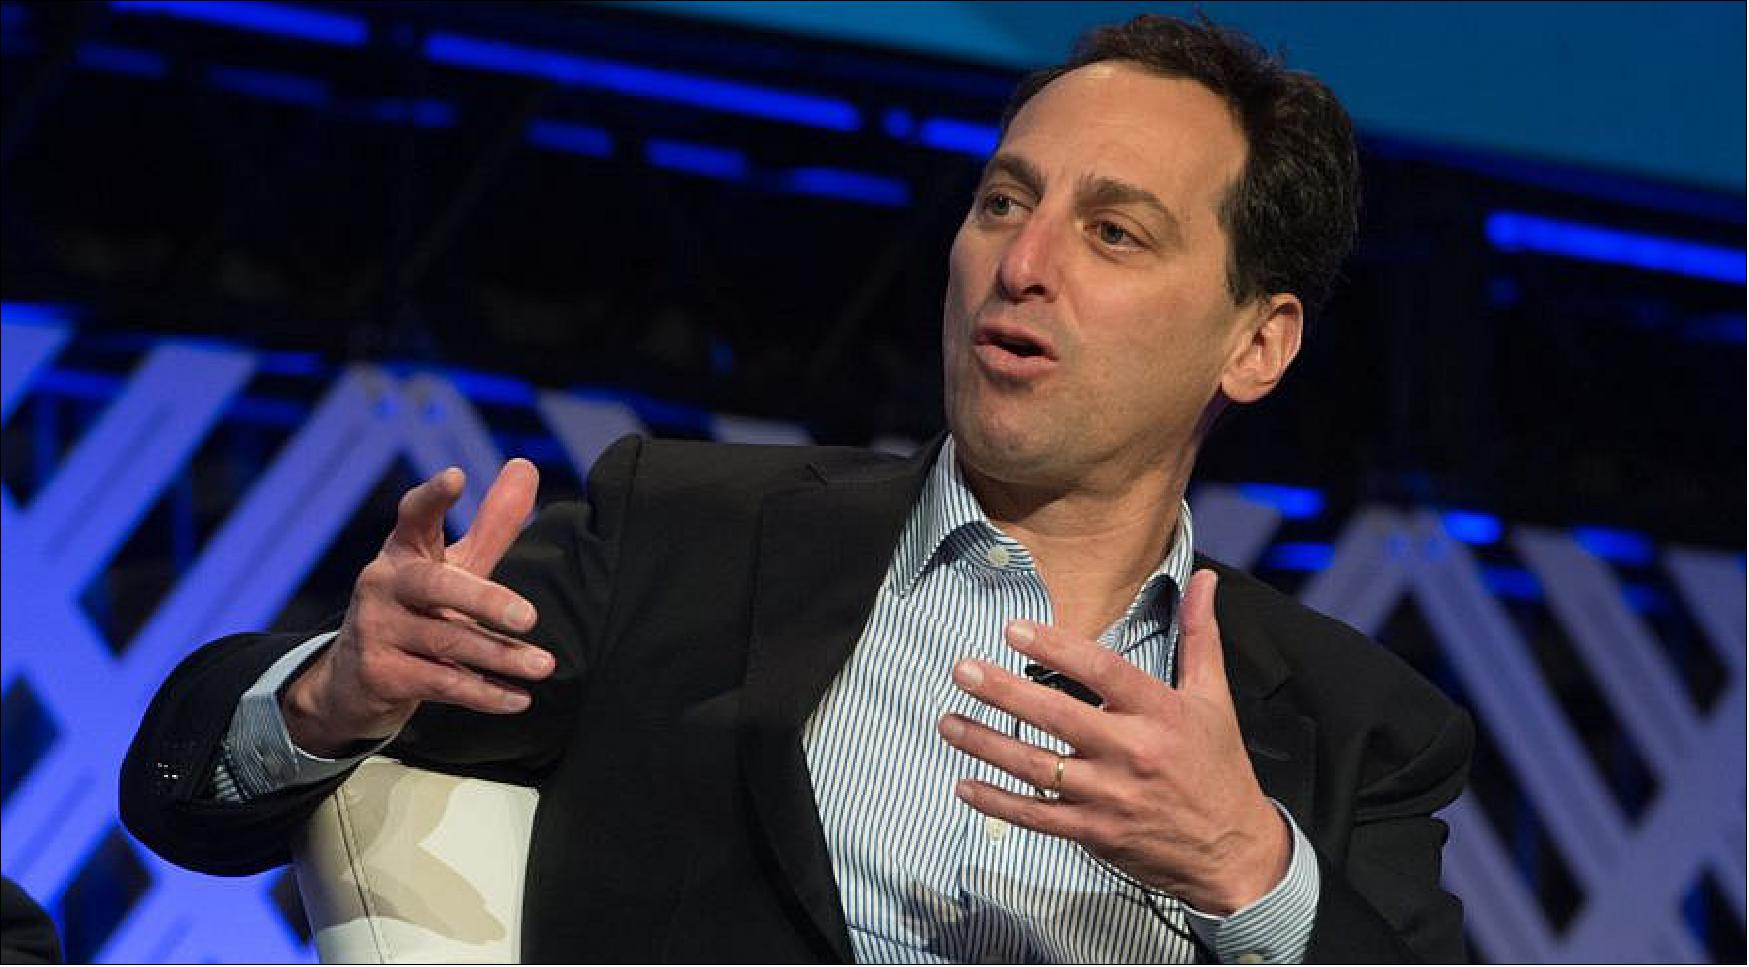 Figure 5: Telesat CEO Dan Goldberg, who April 6 said he expects to finalize plans to finance and launch Lightspeed in the “next couple of months.” (image credit: SpaceNews/Kate Patterson)